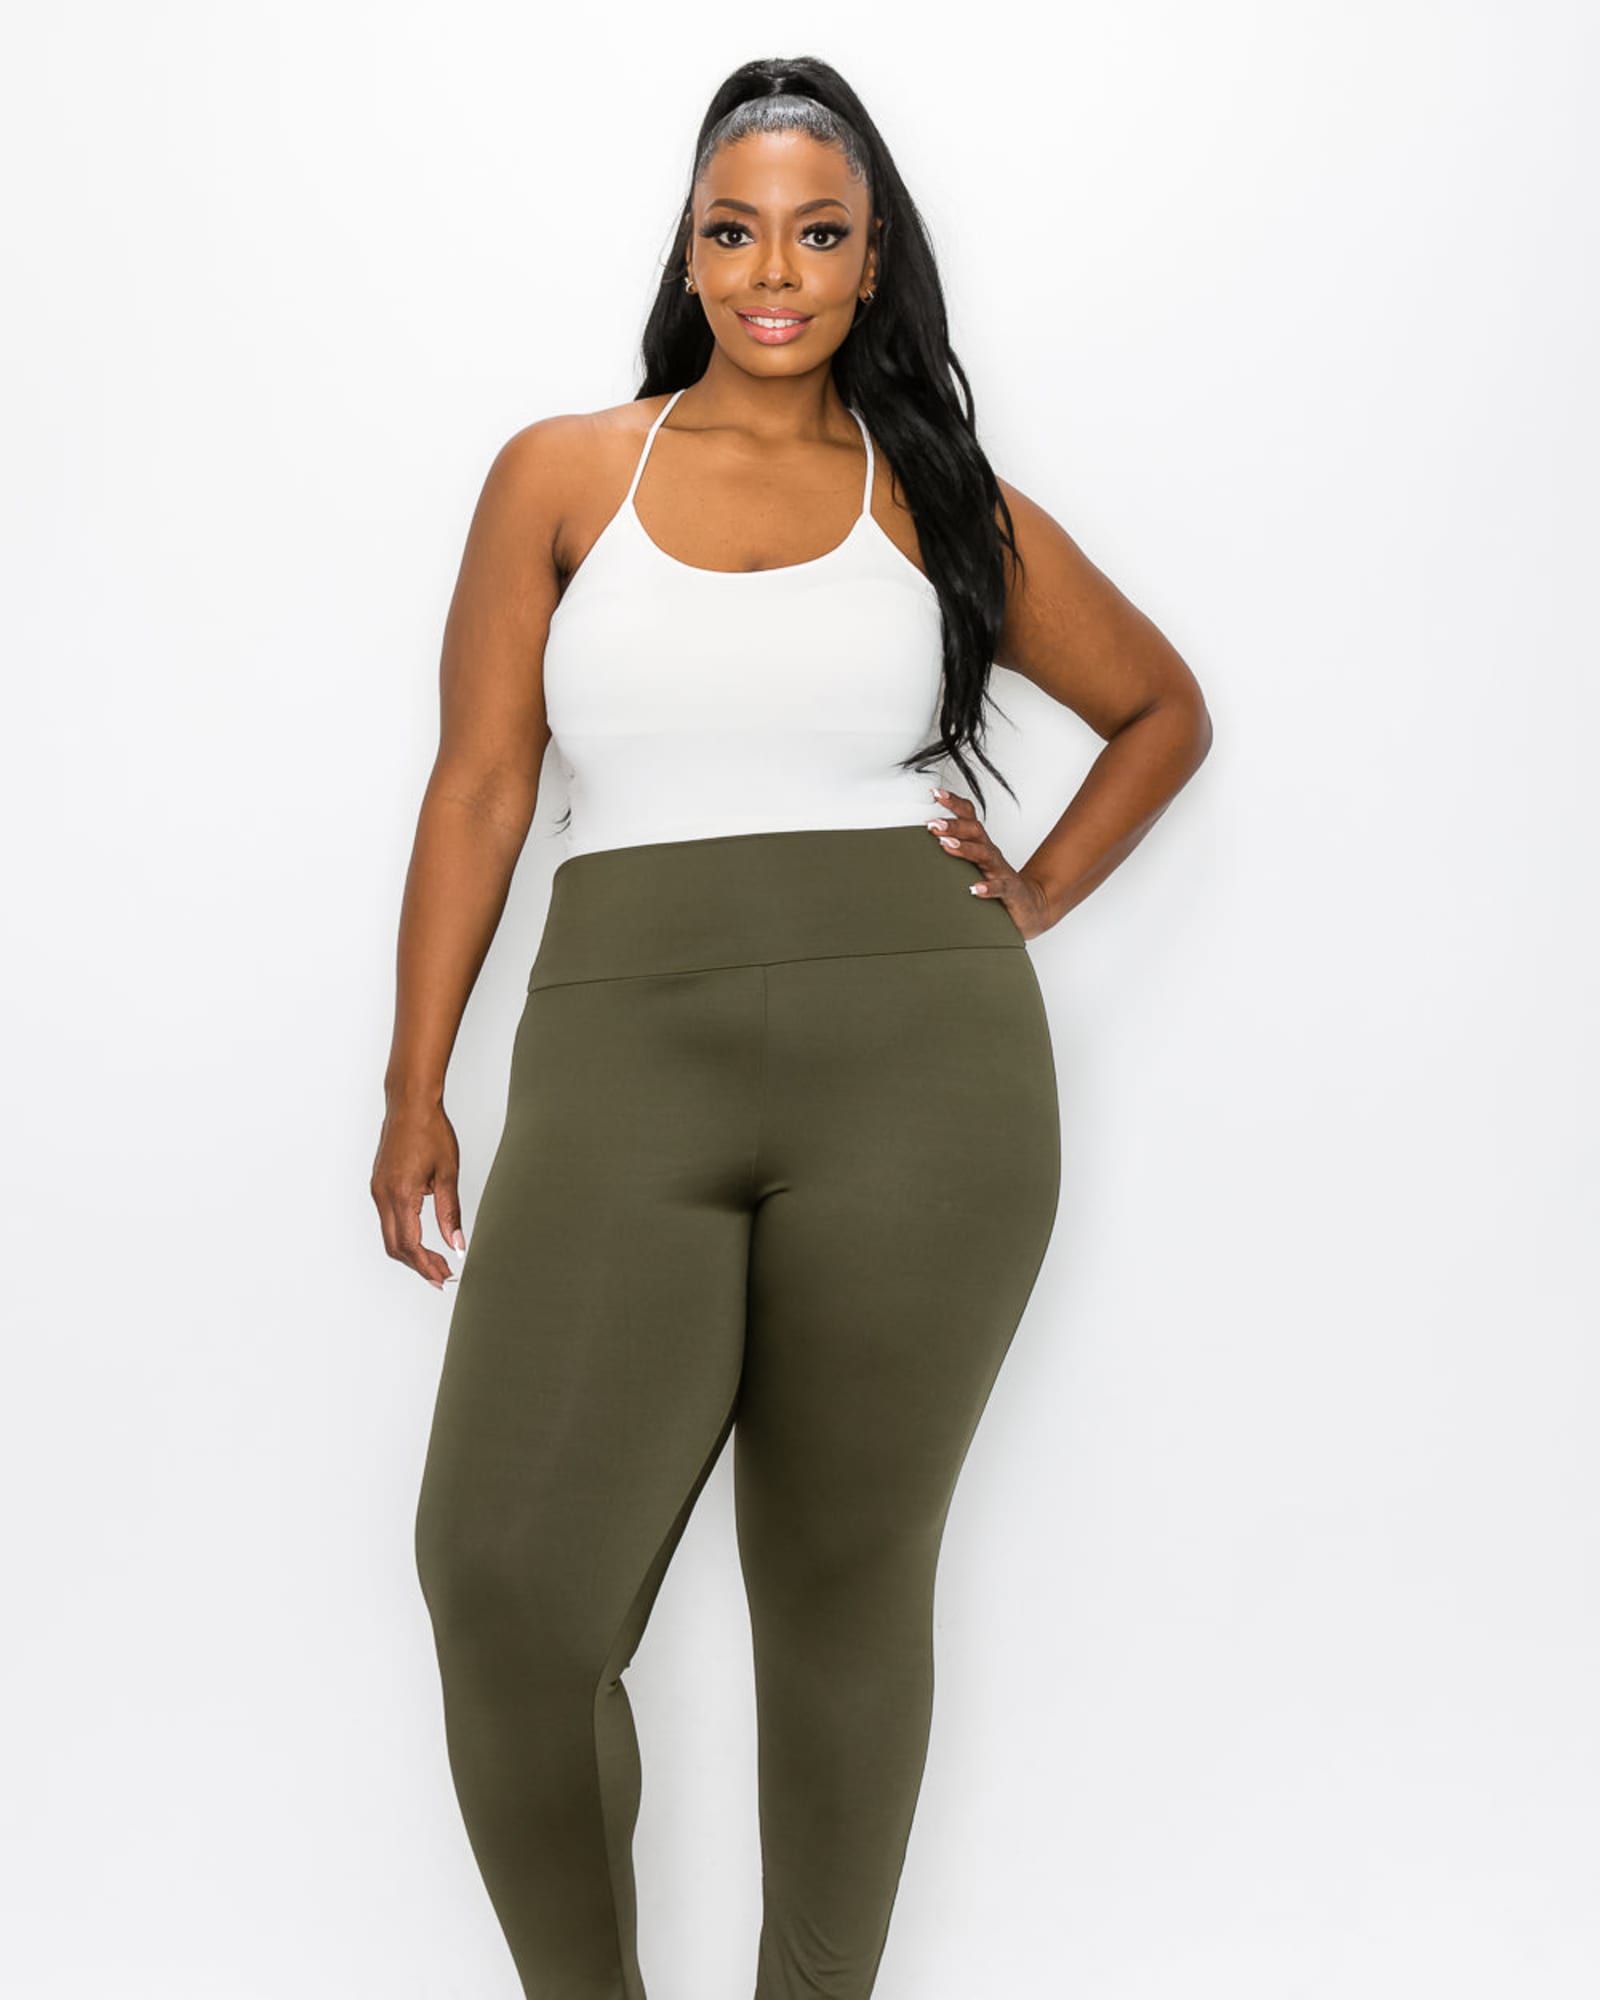 Plus size yoga pants 5 best outfits - Page 3 of 6 - plussize-outfits.com